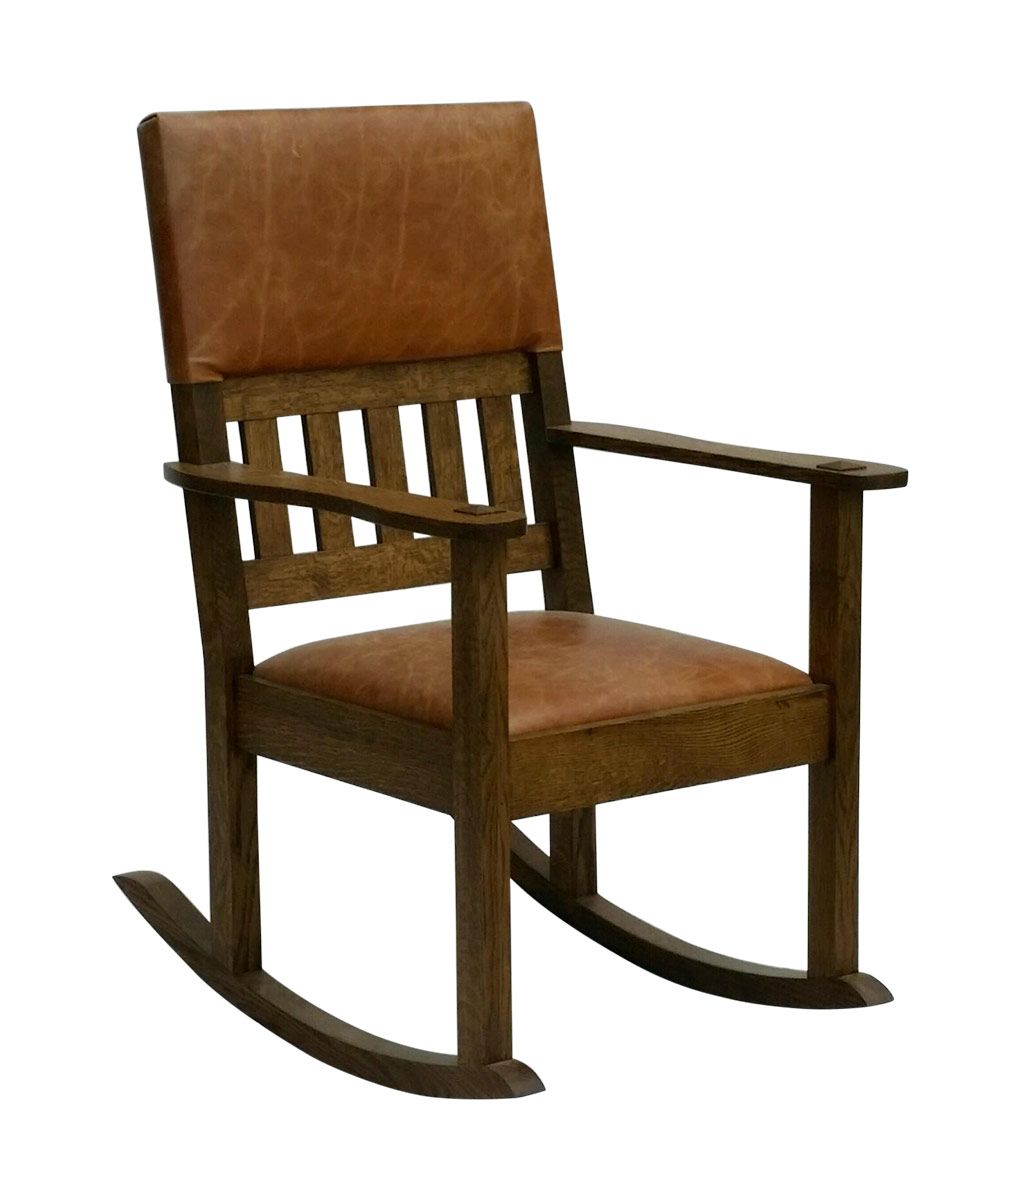 Big Cedar Rocker Throughout Mission Design Wood Rocking Chairs With Brown Leather Seat (Photo 7 of 20)